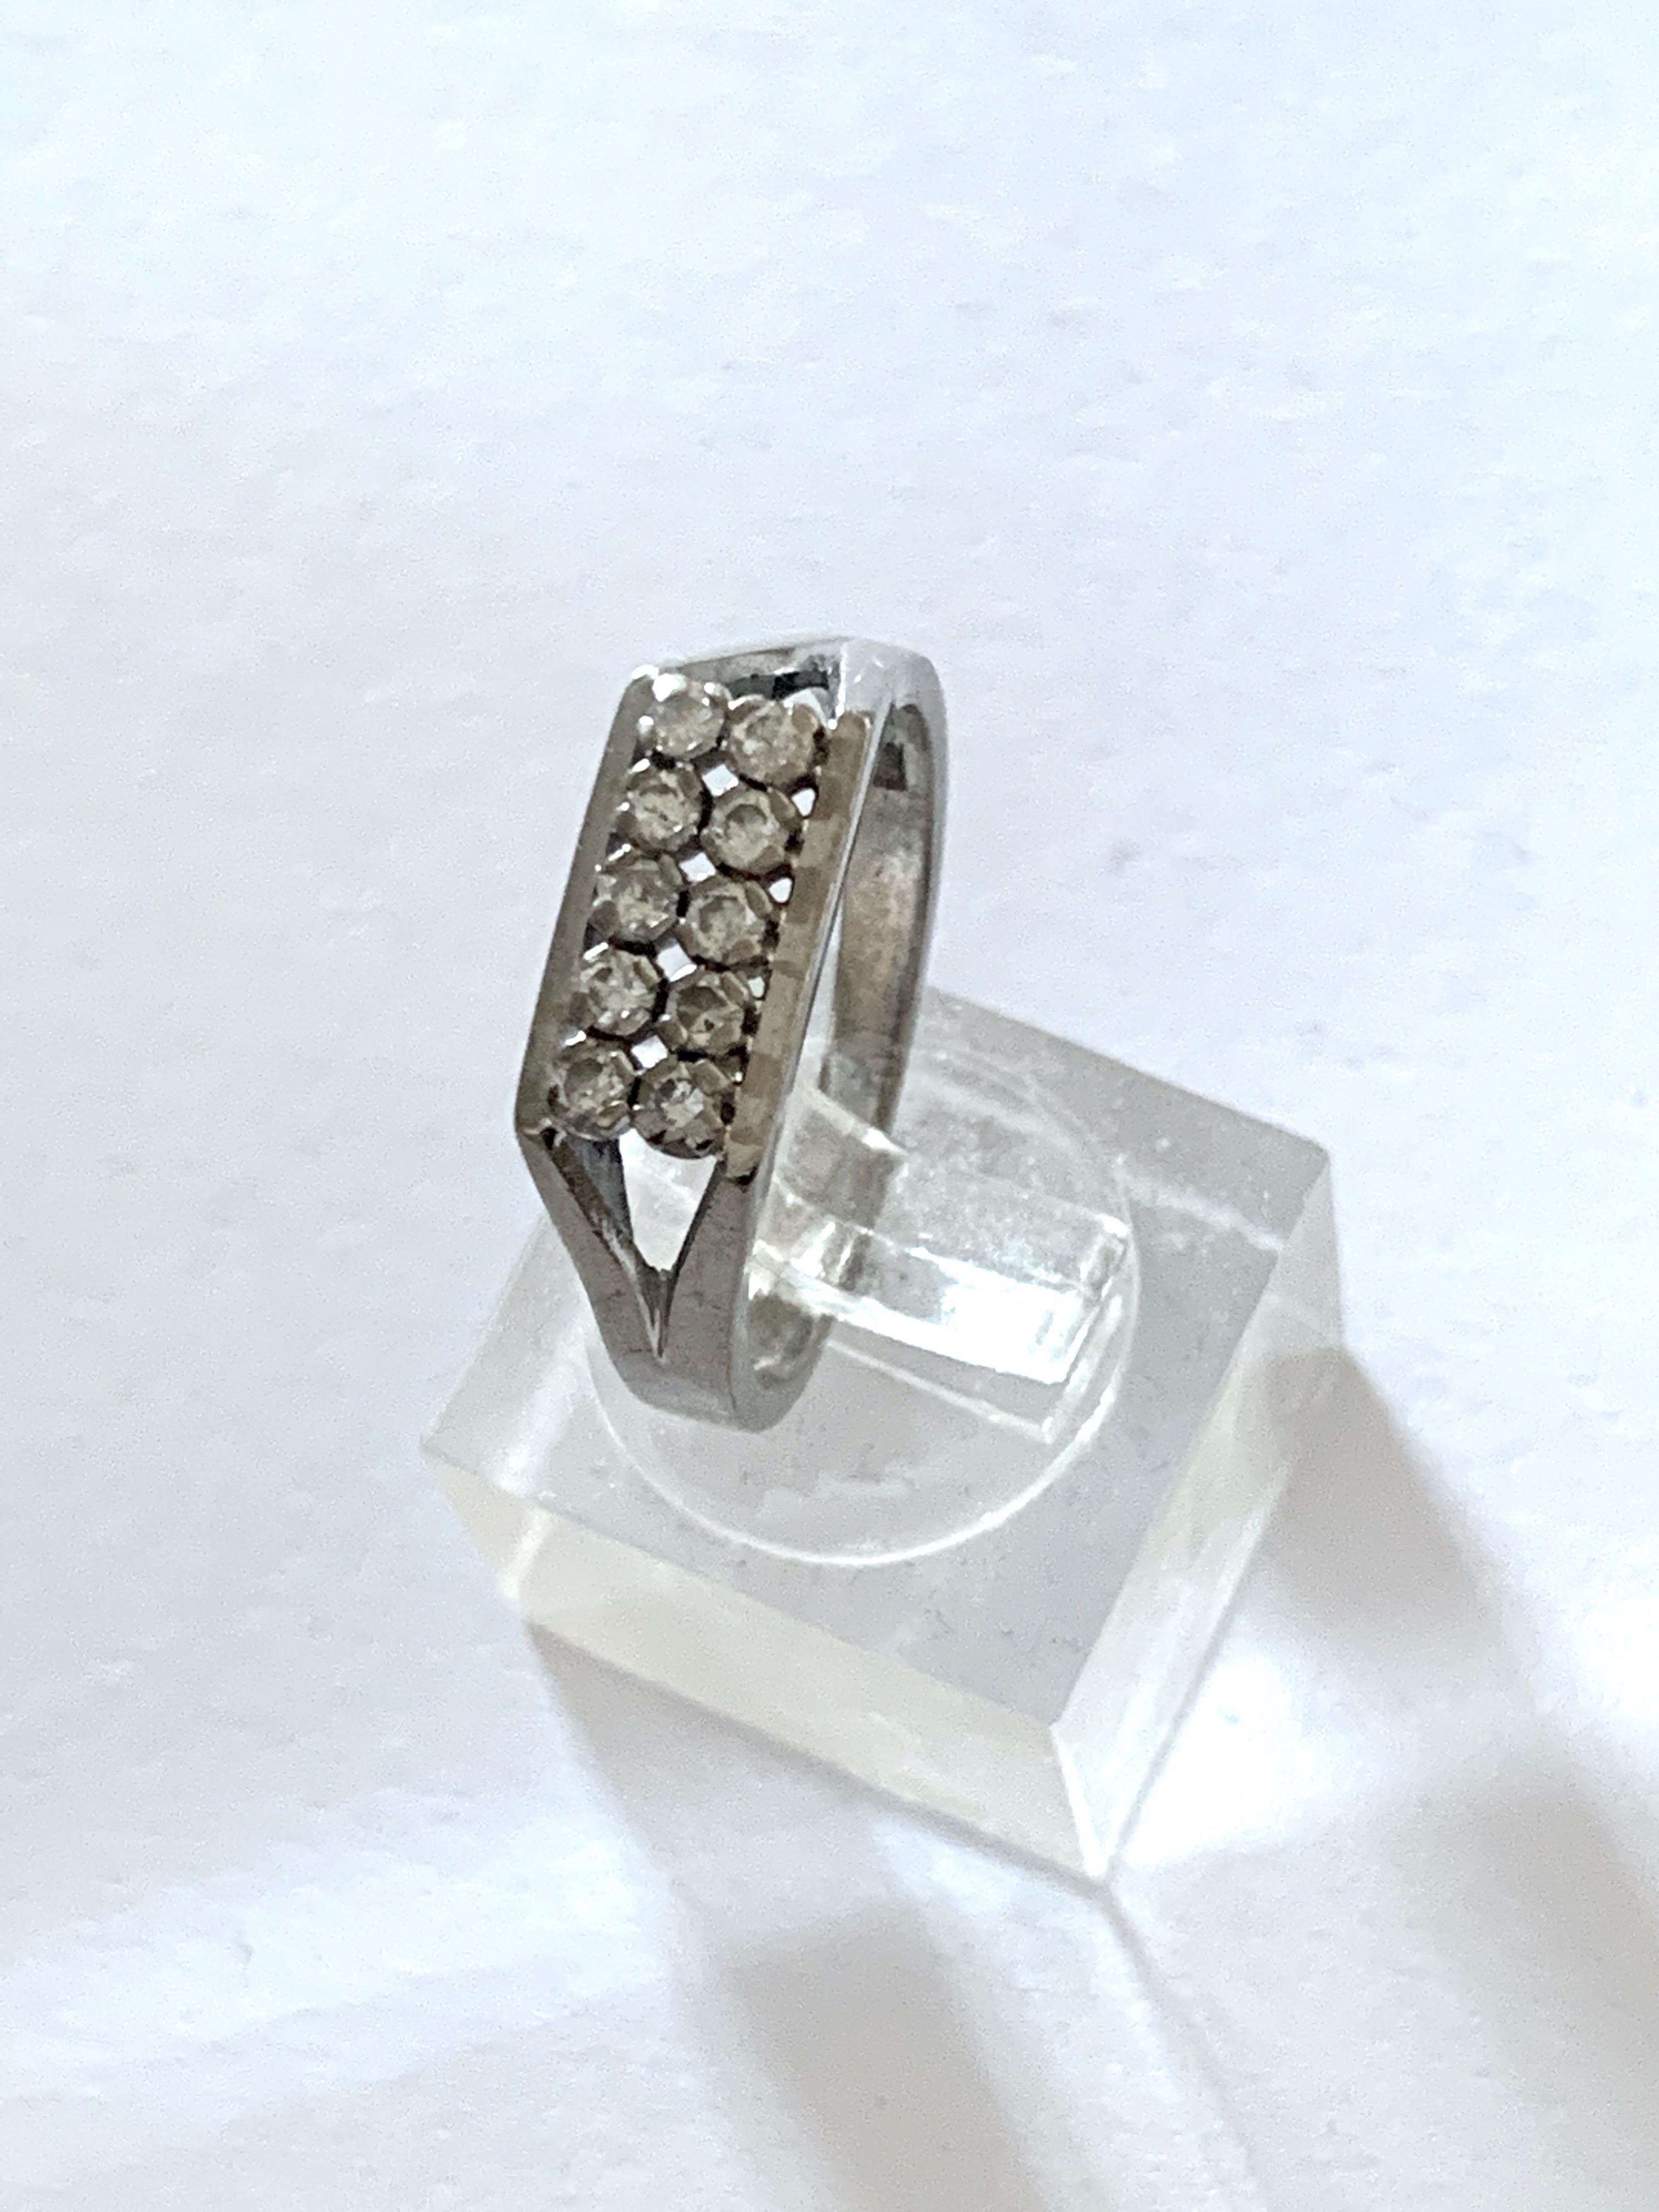 18ct 750 White Gold 0.3 Carat Diamond Ring
Full British Hallmarks
Circa 1970s

10 x 2mm diamonds Natural Diamonds
which are very lively and of good quality

Weight of Ring 4.87 grams